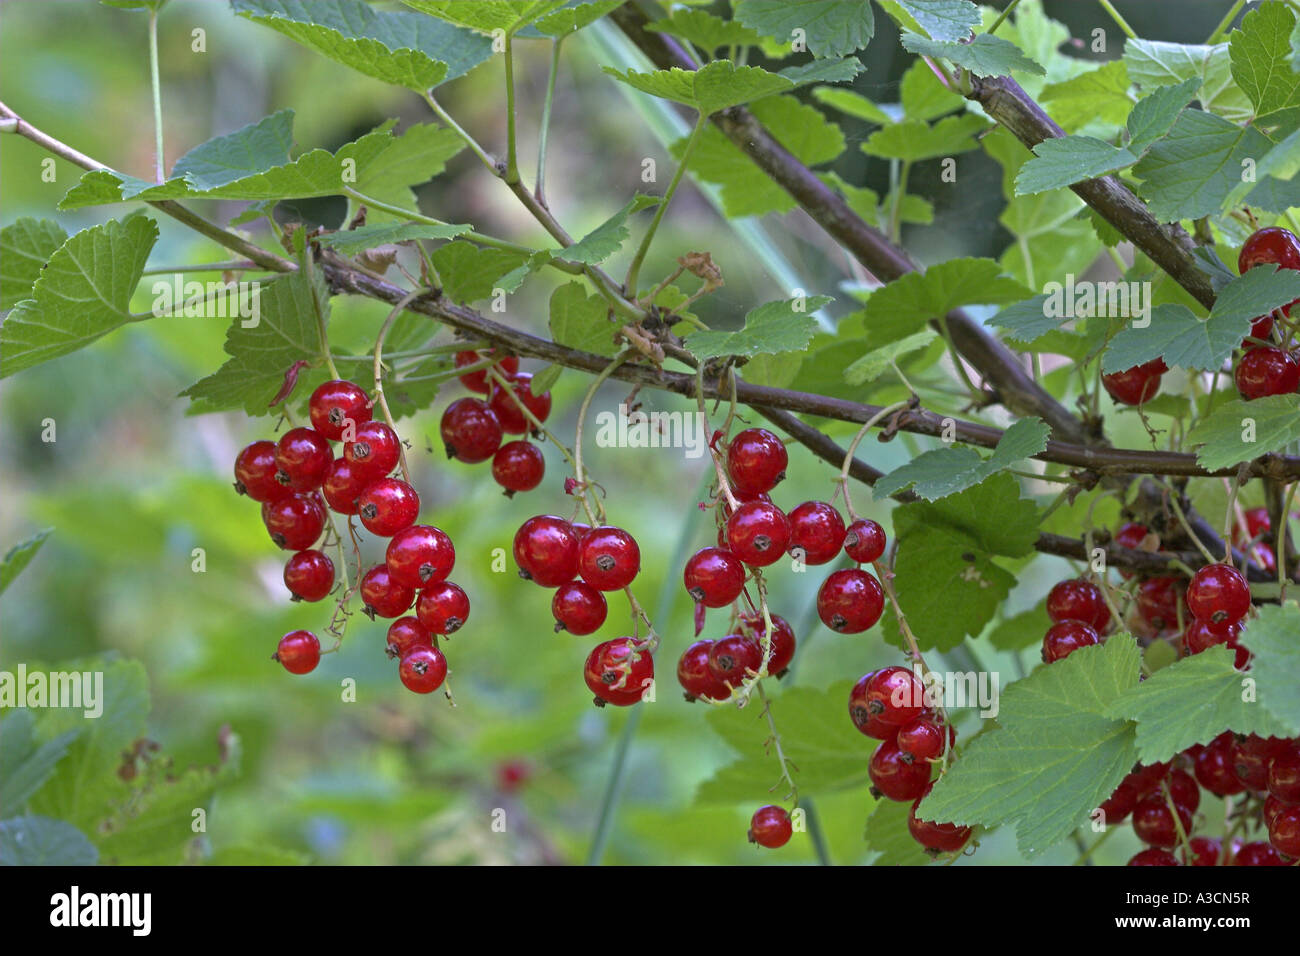 northern red curran (Ribes rubrum), ripe fruits, cultivar Stock Photo